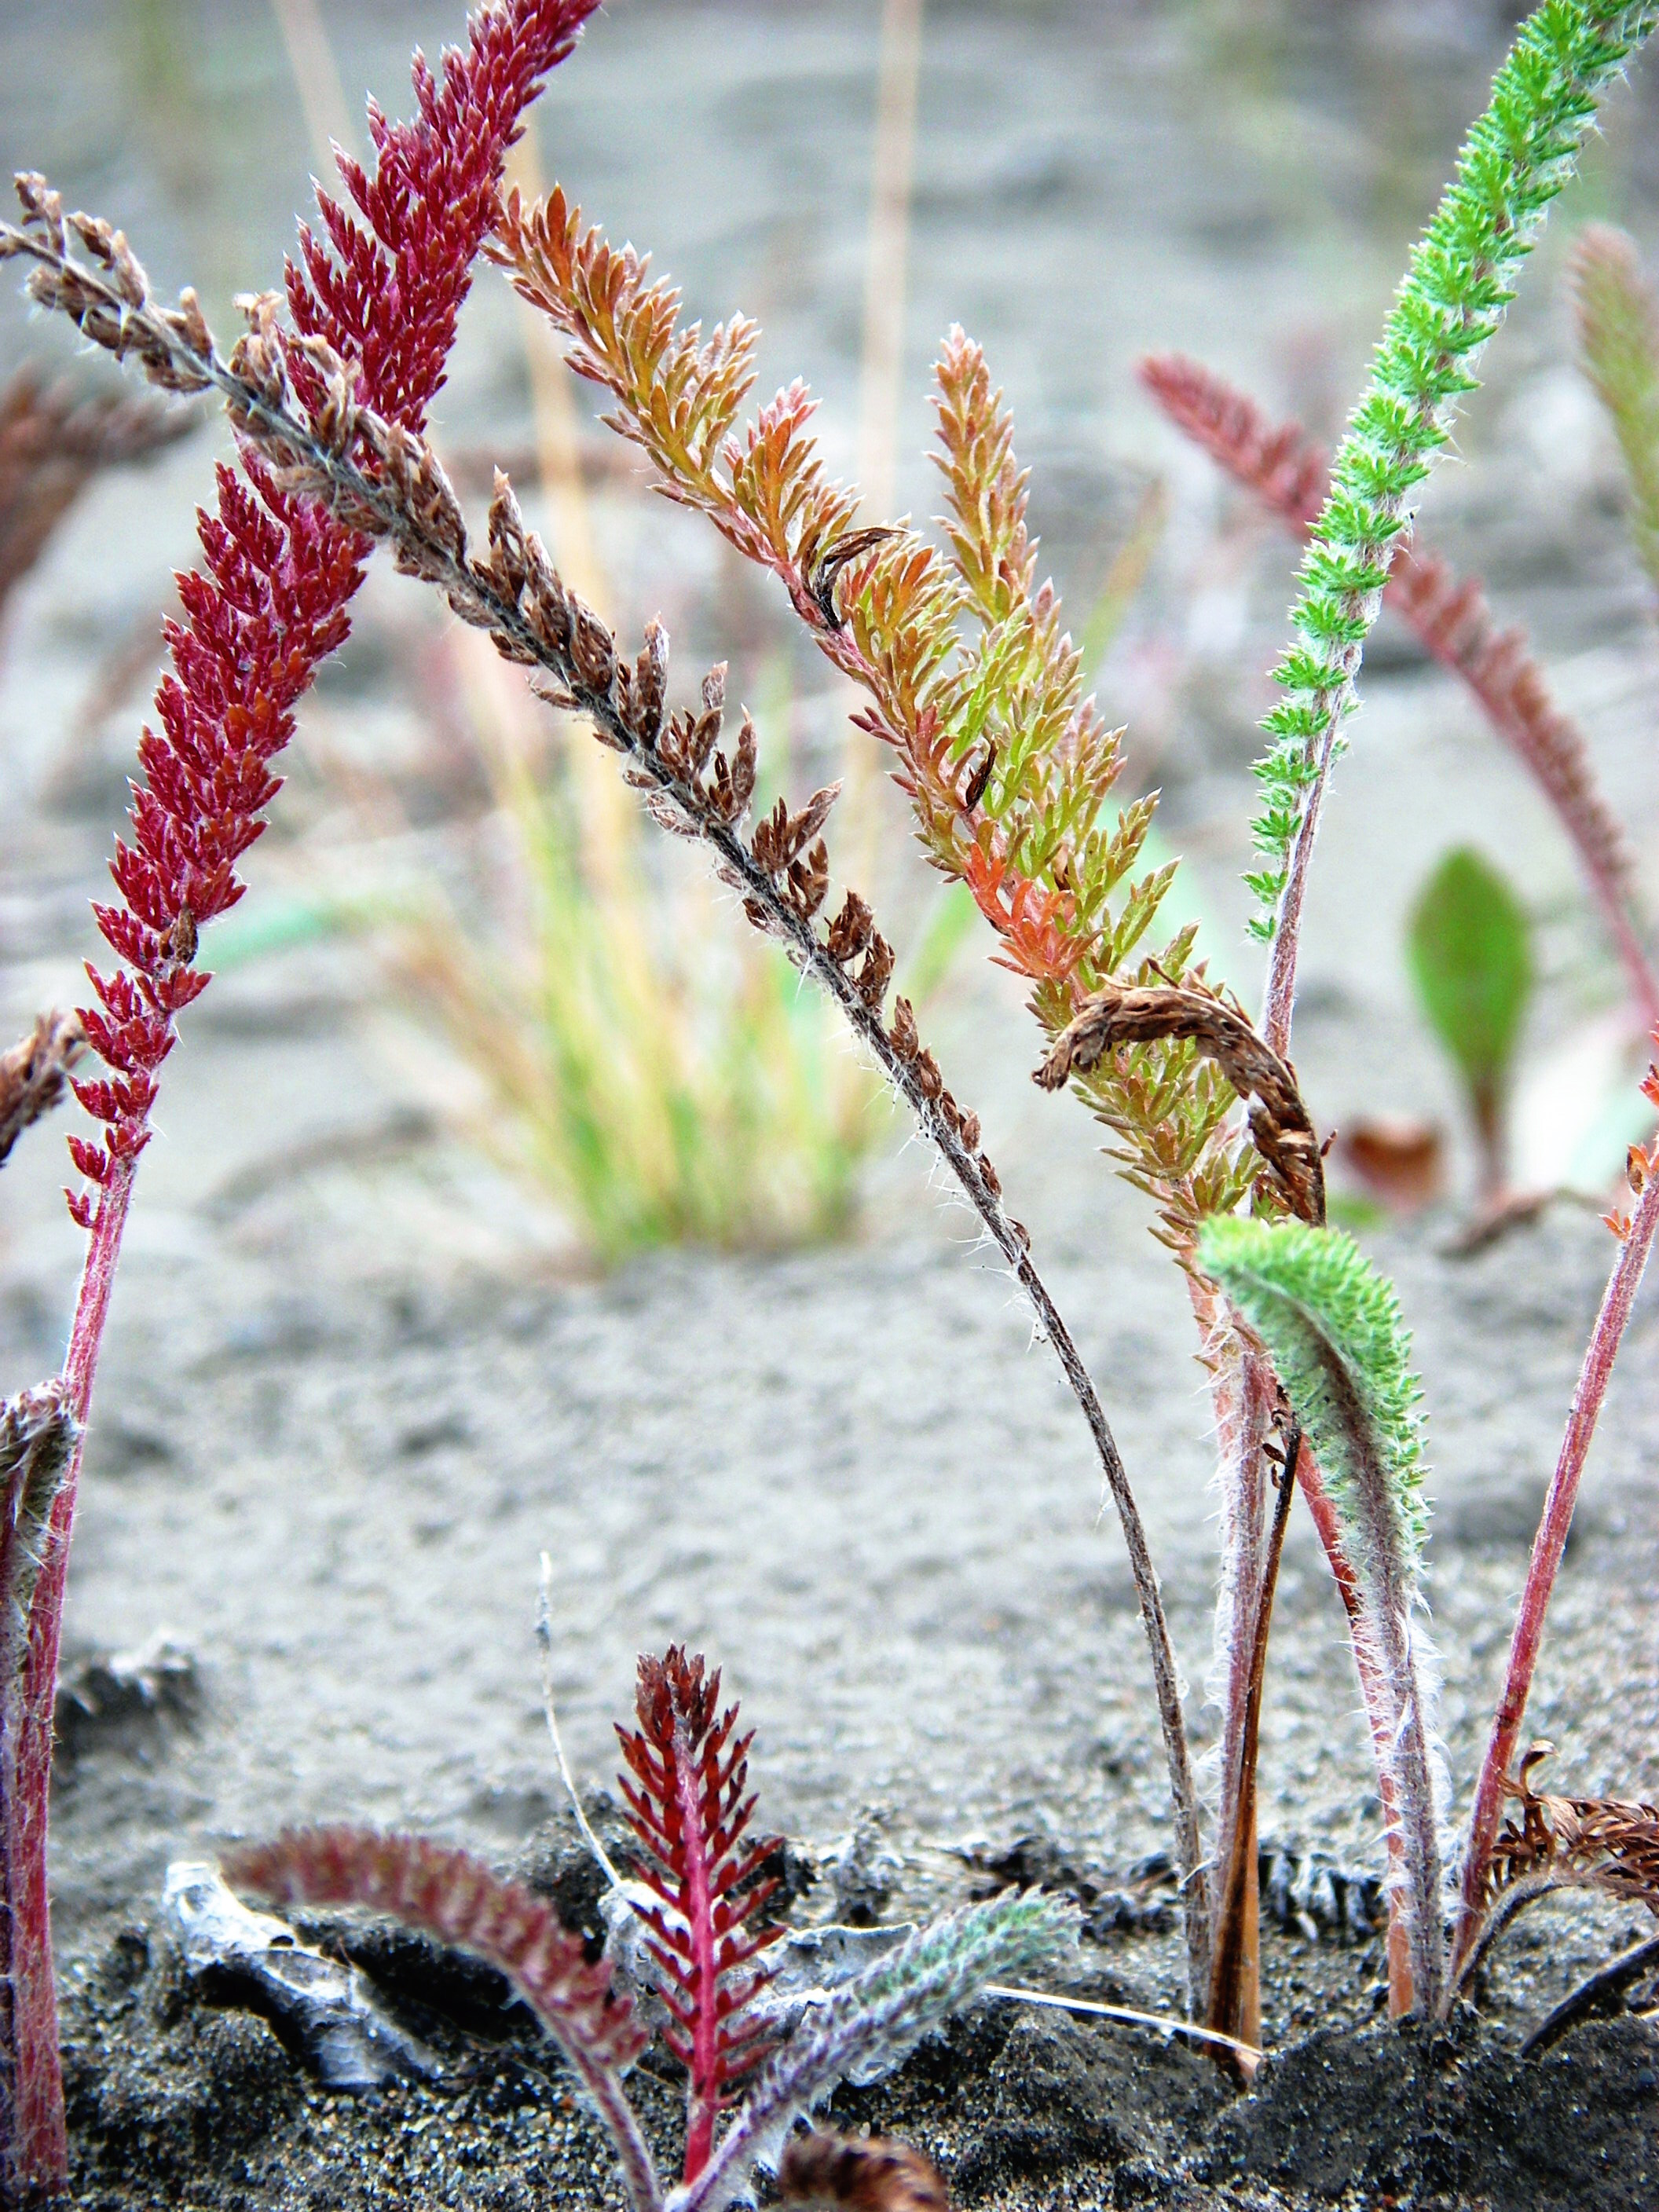 Colorful plants grow out of the sandy ground